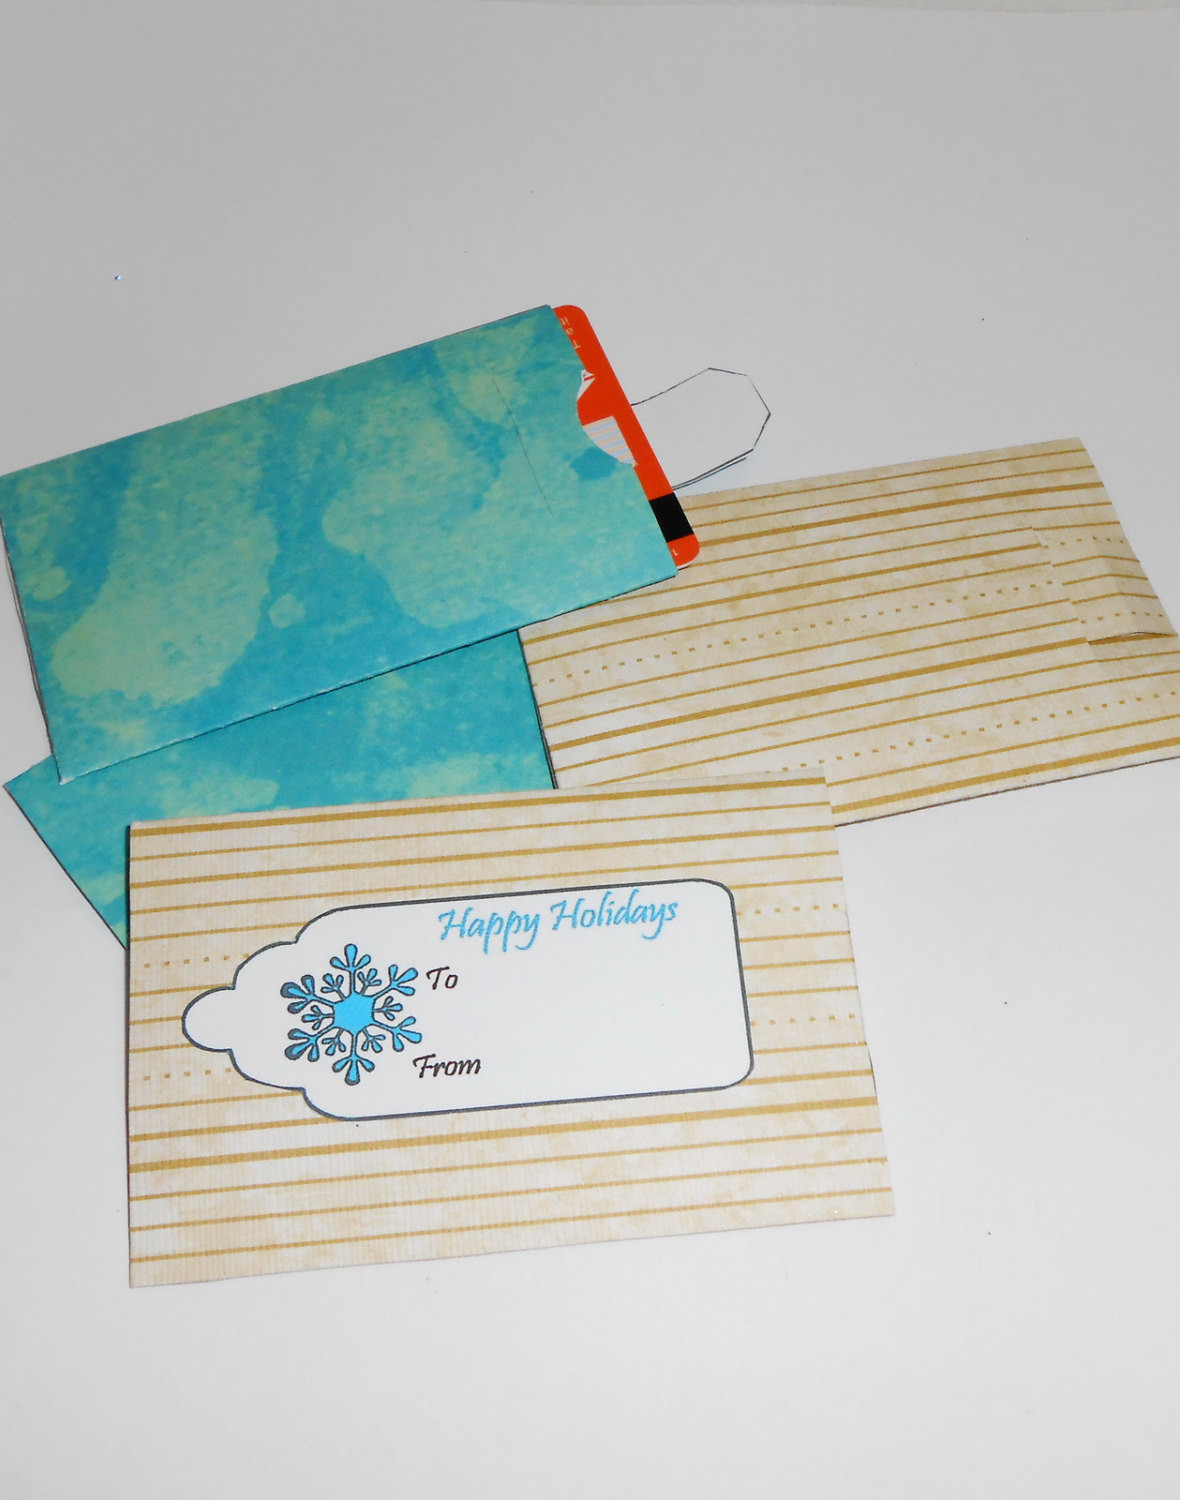 DIY Gift Card Envelopes
 DIY Gift Card Envelopes Gift Card Envelope by TLCreations73